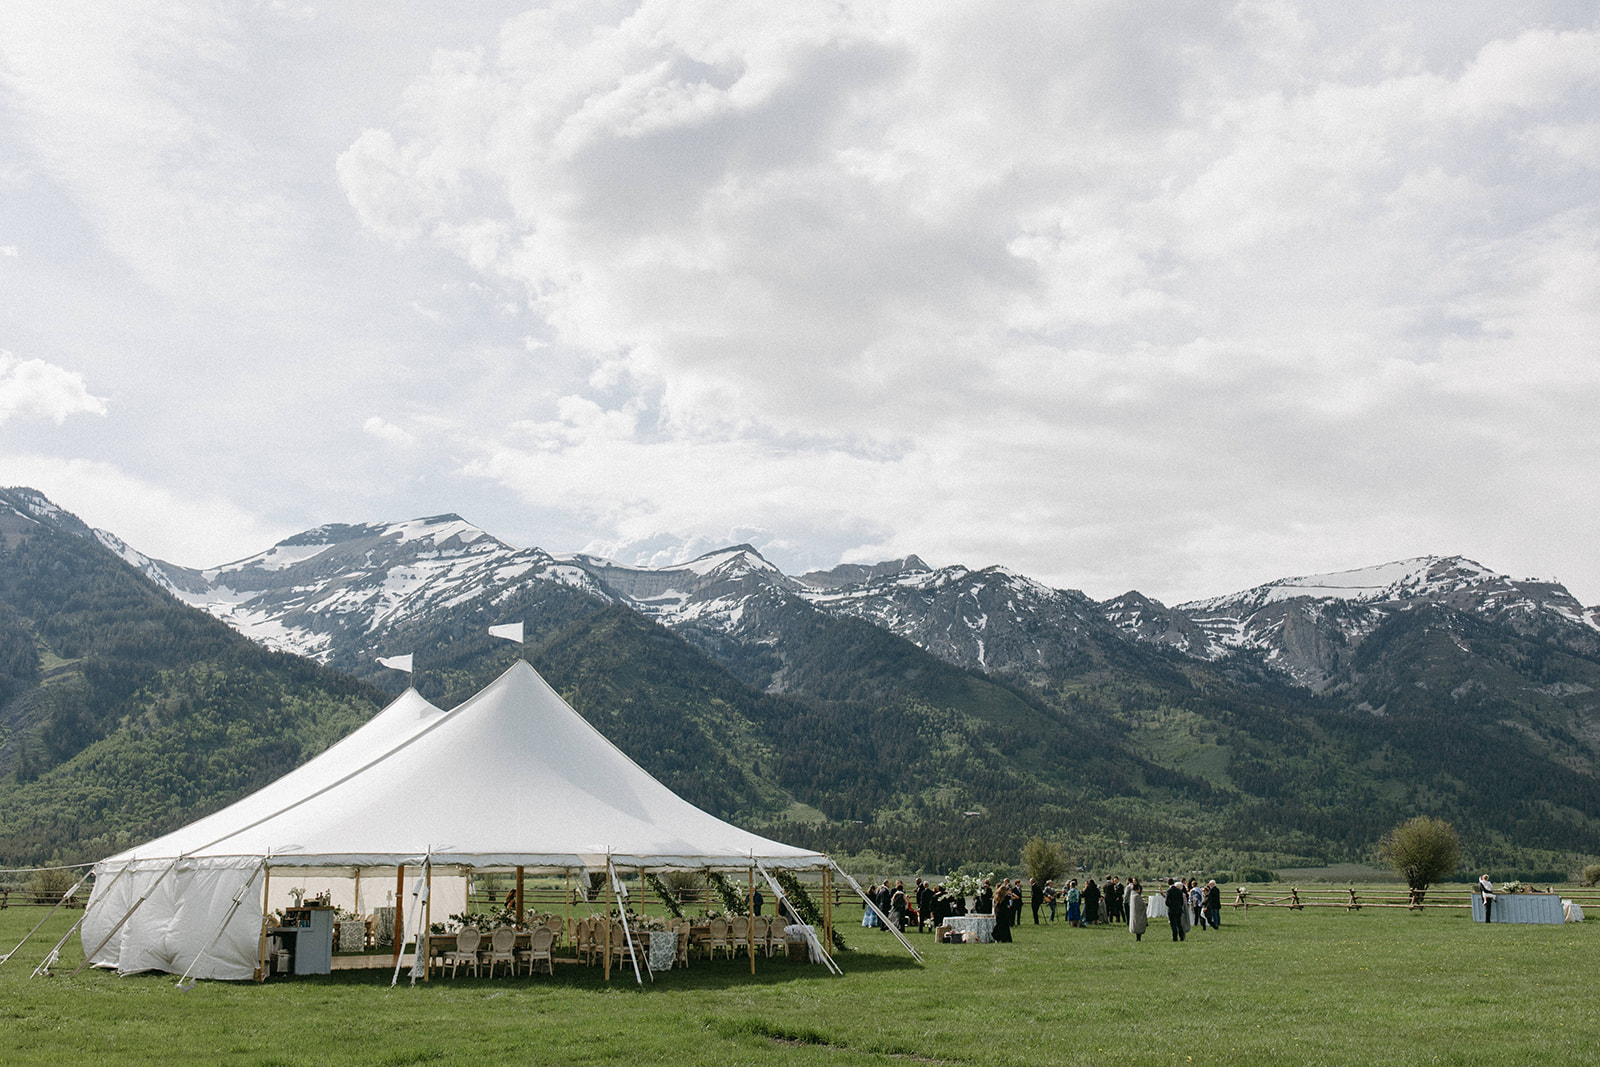 A white, luxury outdoor wedding reception rental tent with the Tetons in the distance near Jackson Hole, Wyoming.
